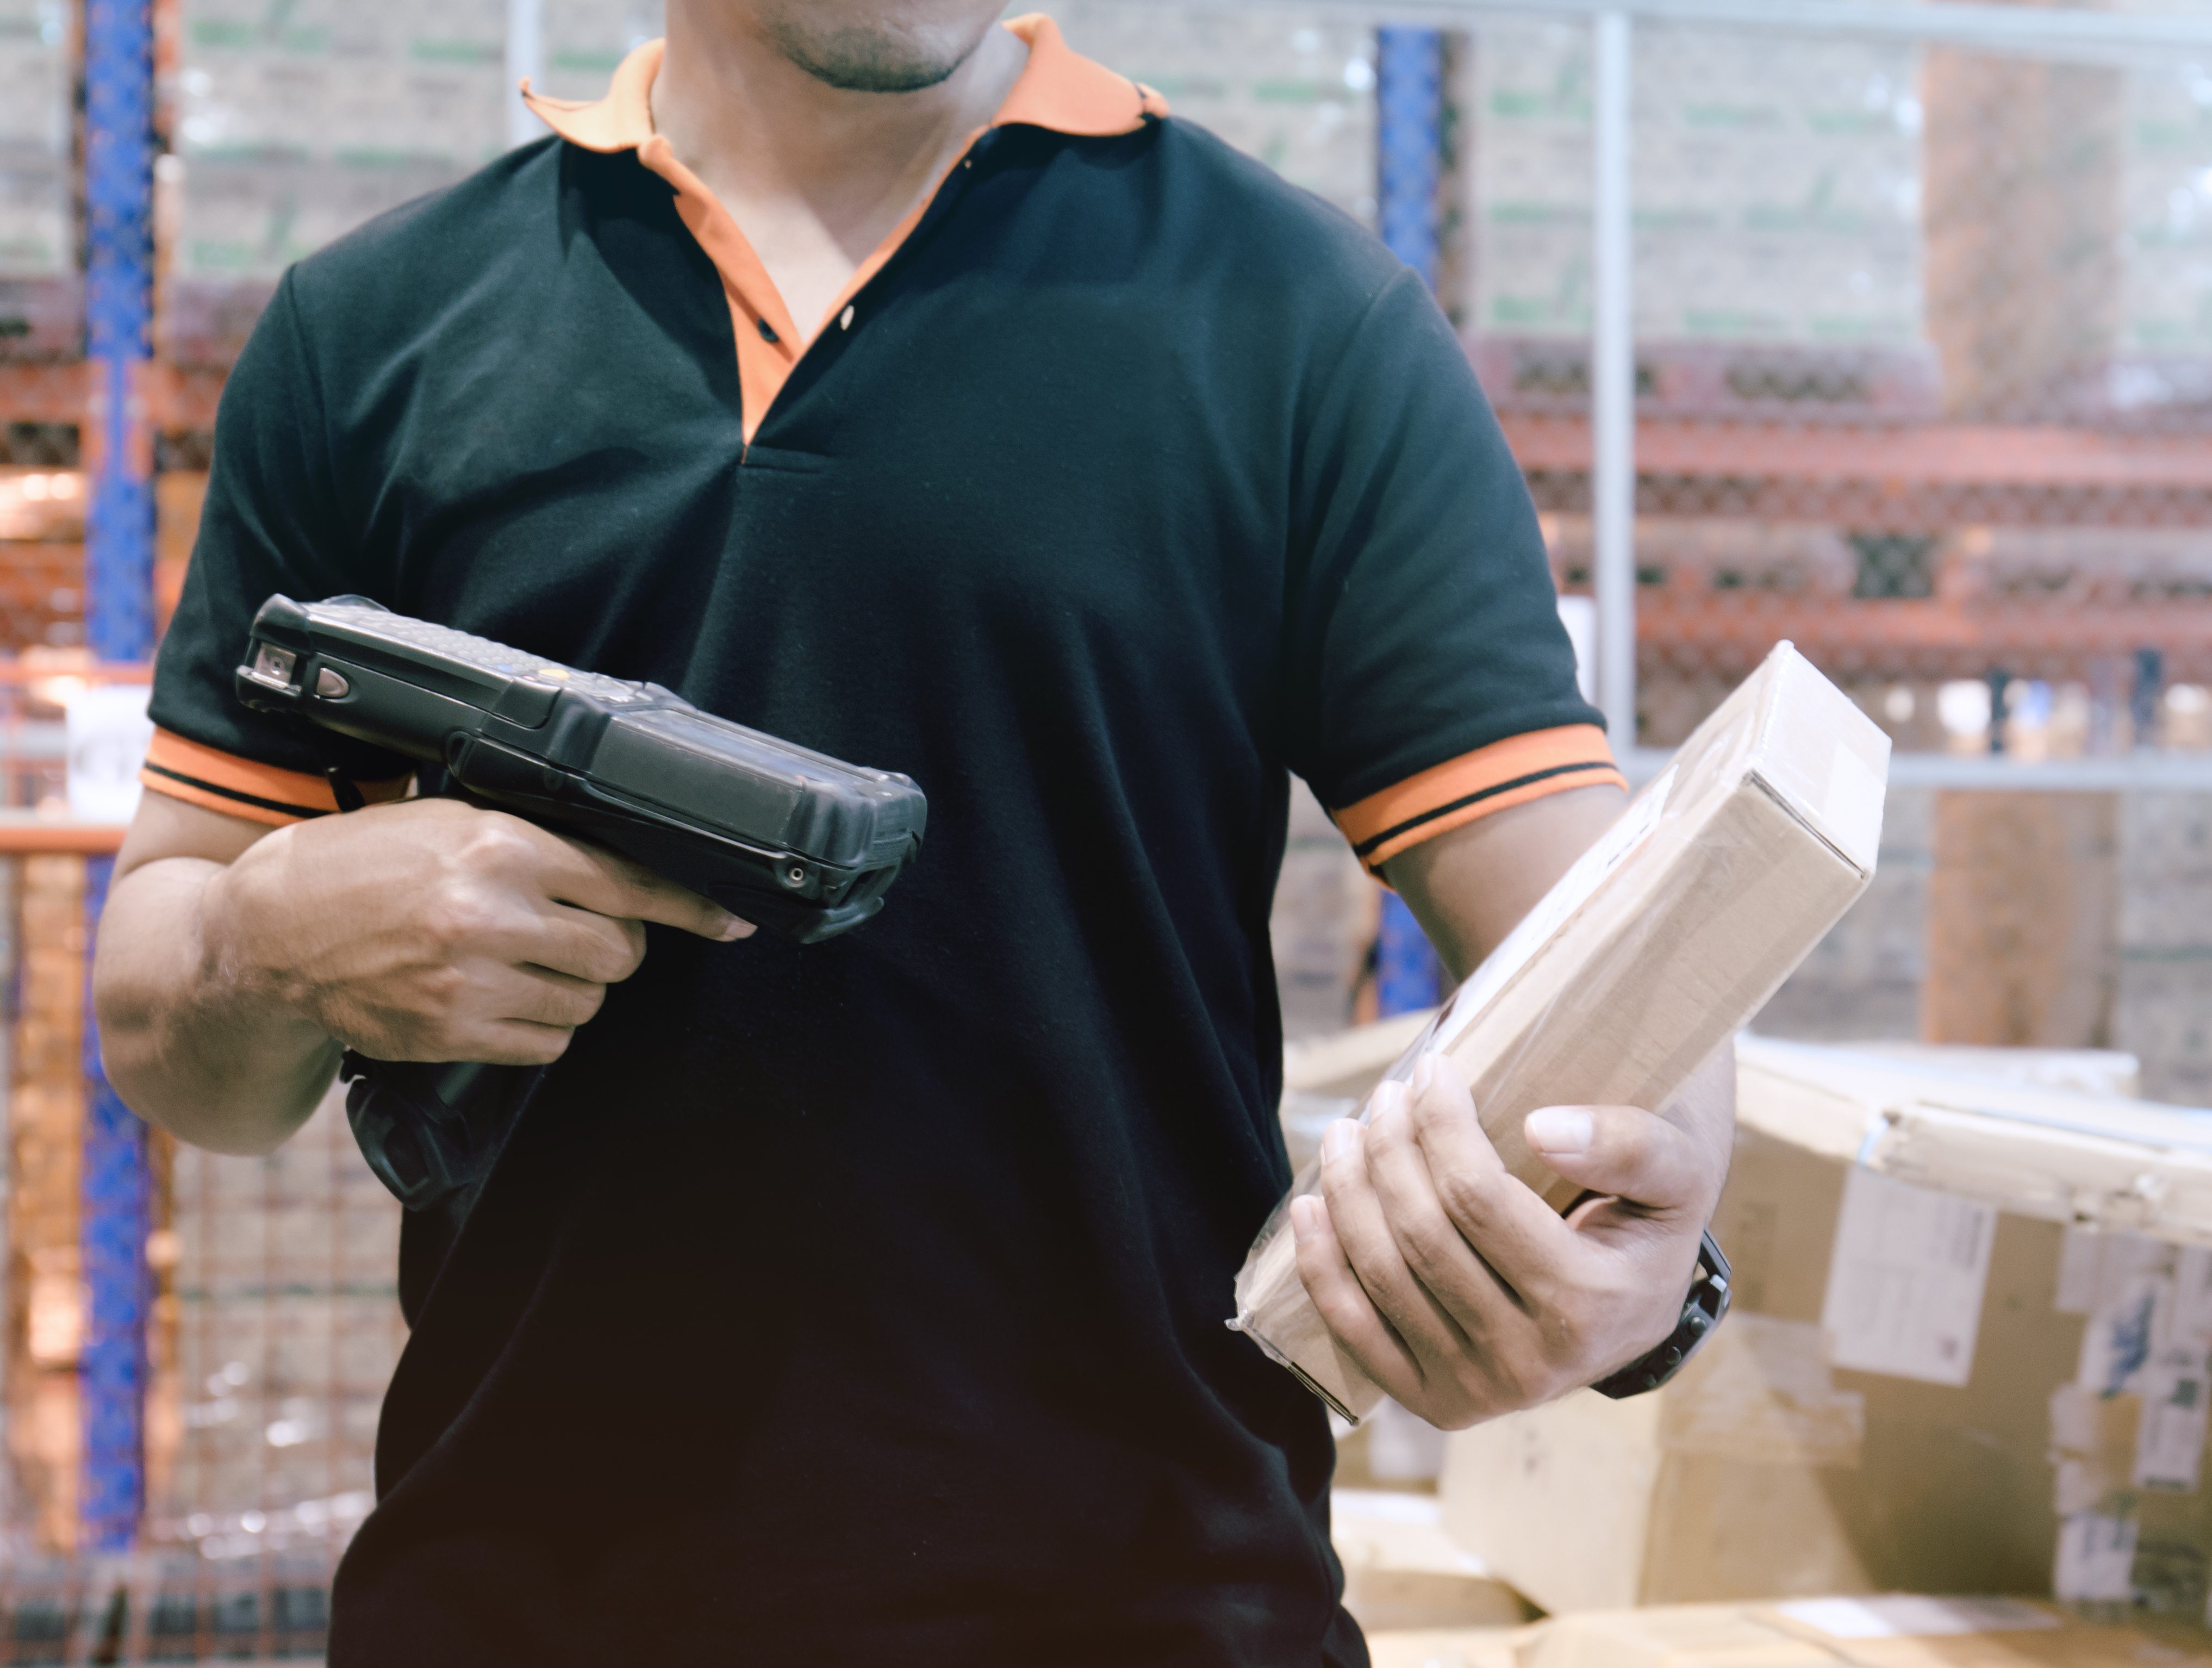 man scanning package showing E-commerce fulfilment process